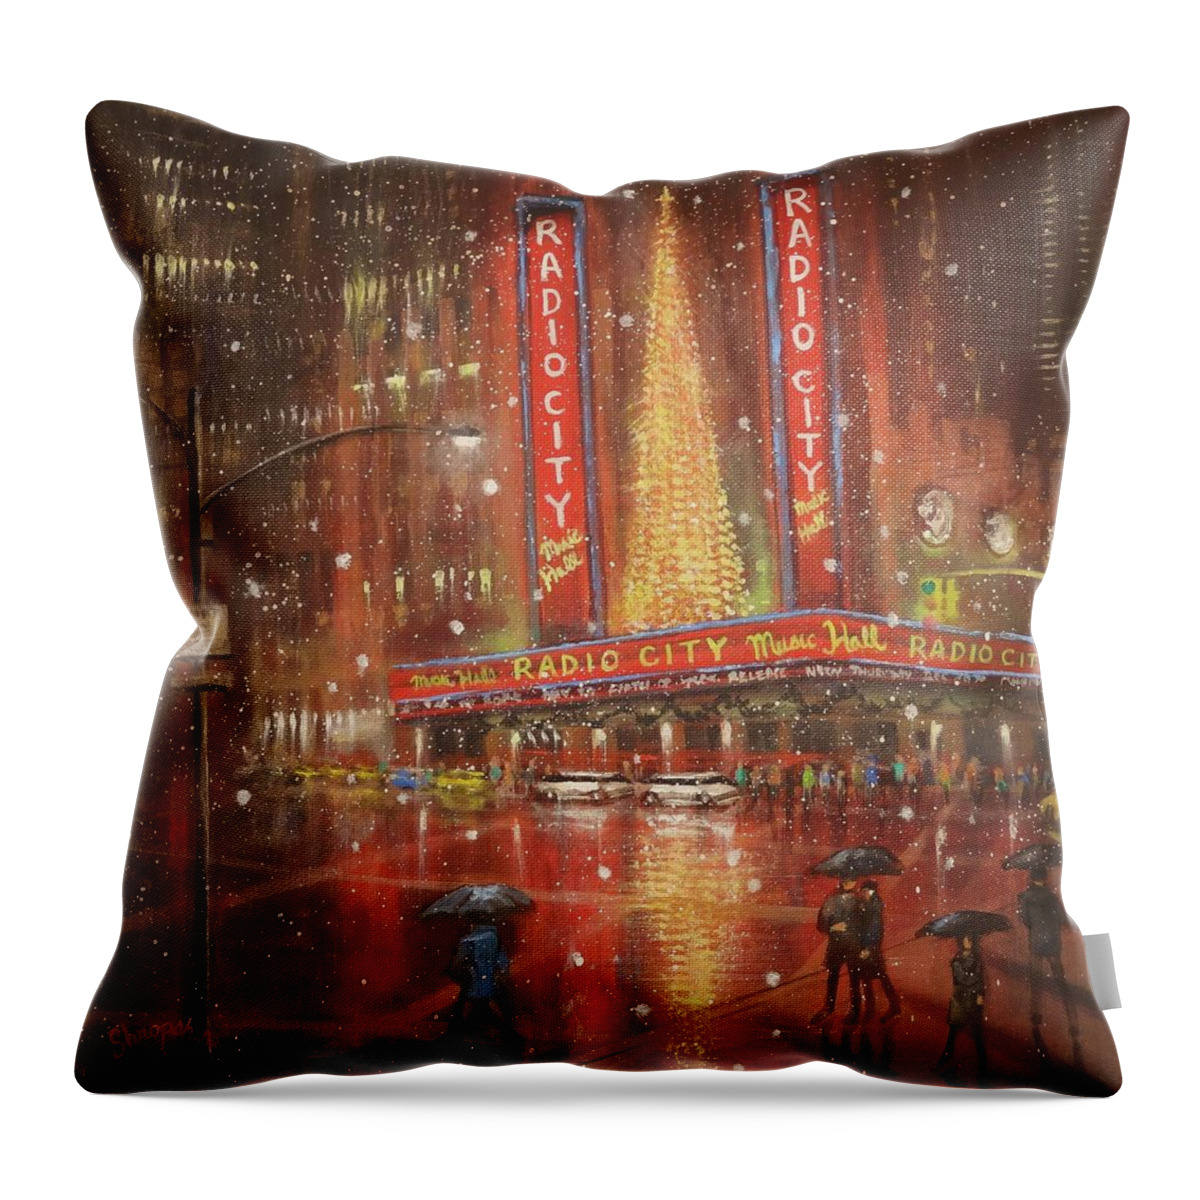 Radio City Music Hall Throw Pillow featuring the painting Radio City NYC by Tom Shropshire